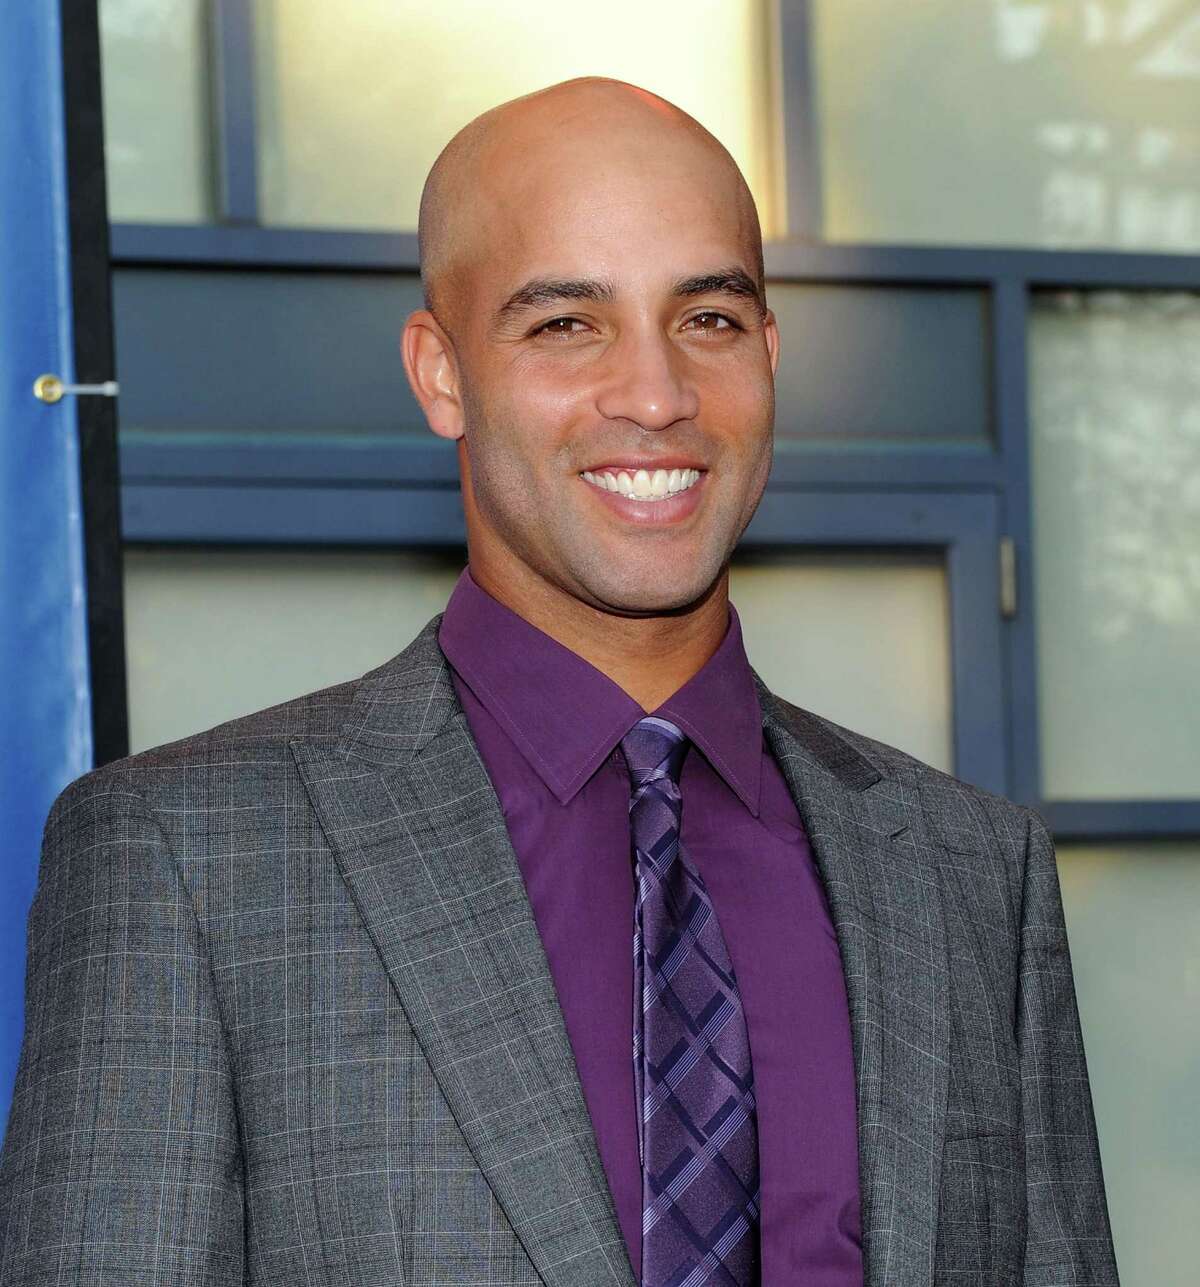 Tennis Player James Blake attends the 2010 US Open Opening Night Ceremony